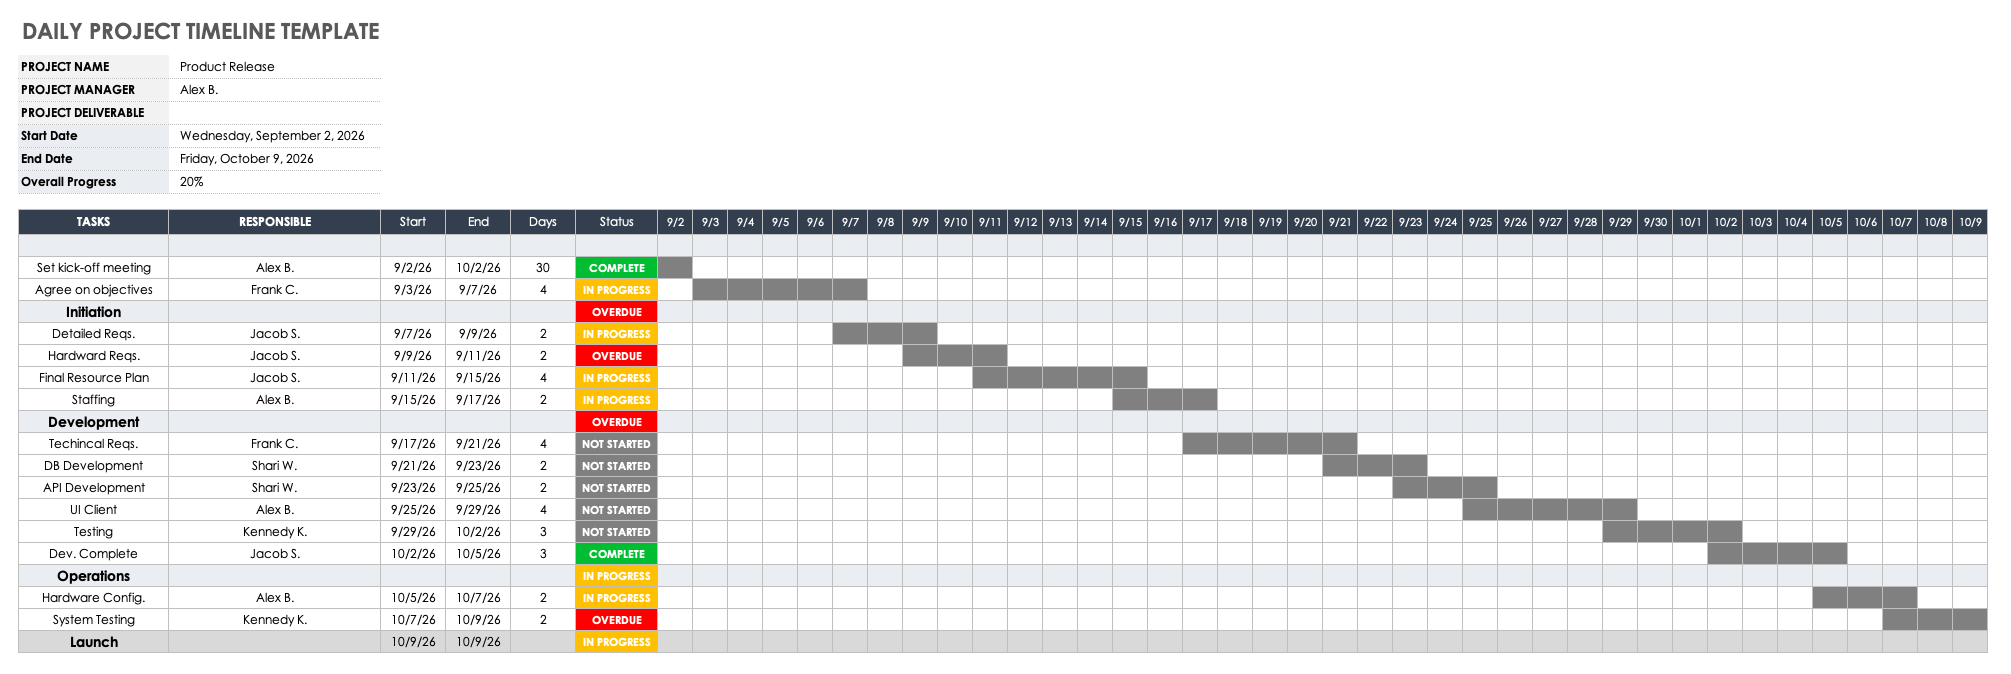 Daily Project Timeline Template Excel